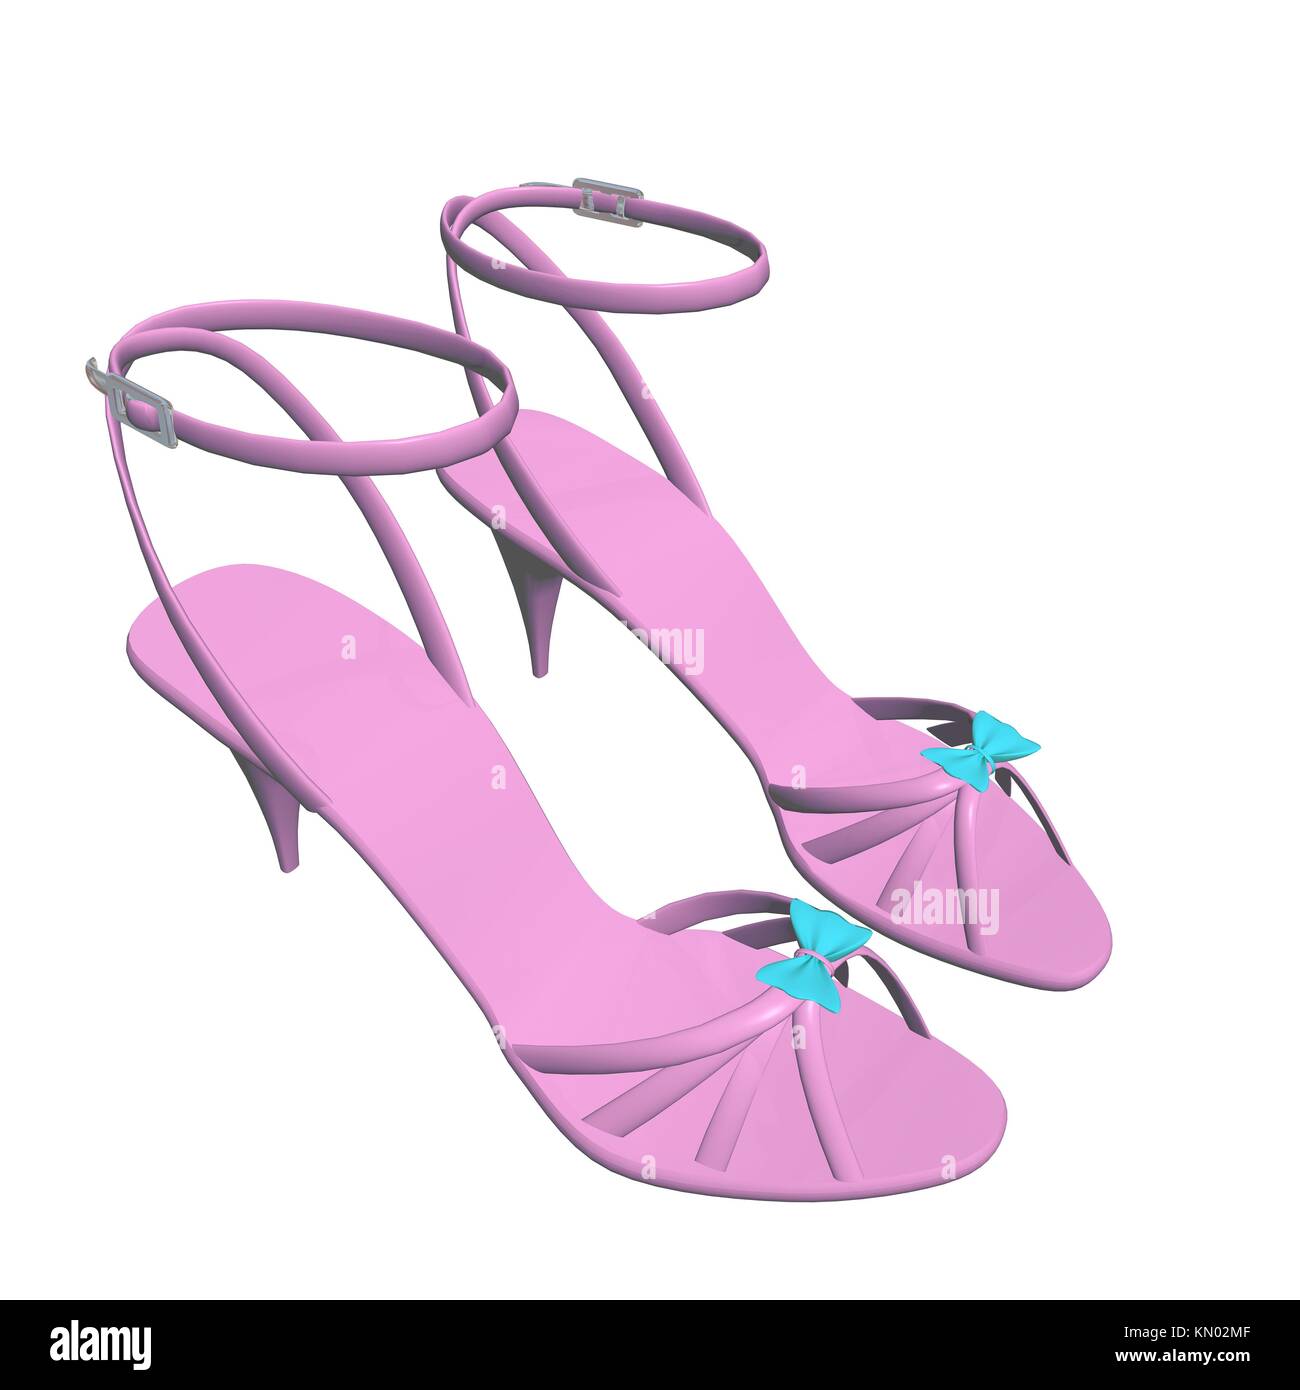 Pink stilleto heels or hig heels shoes with ankle strap and blue ribbon, 3D illustration, isolated against a white background Stock Photo